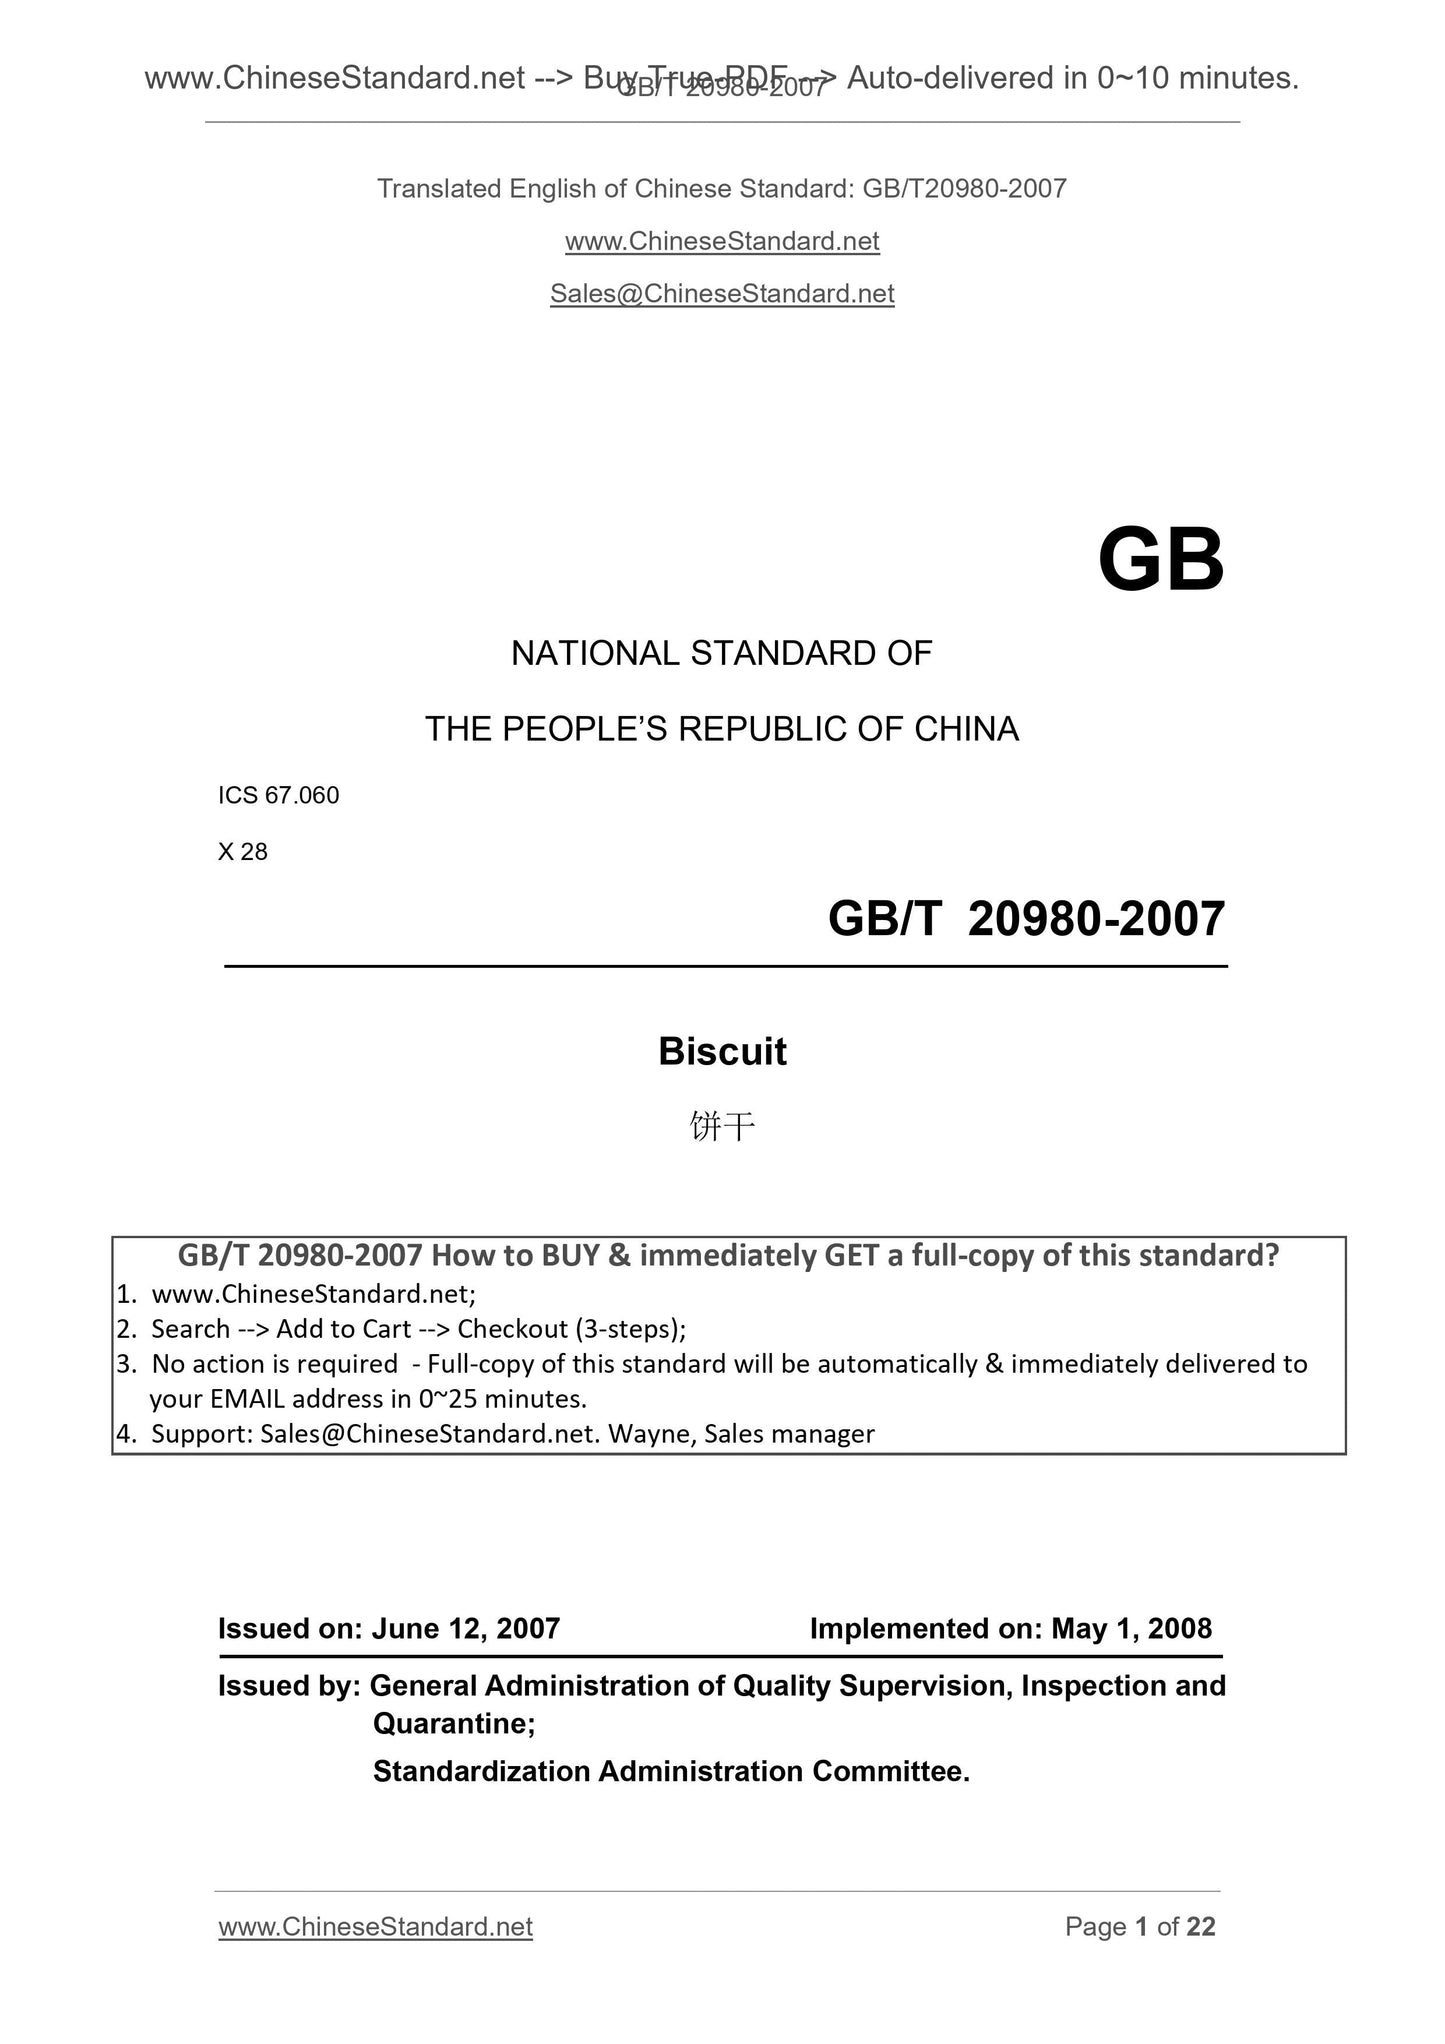 GB/T 20980-2007 Page 1